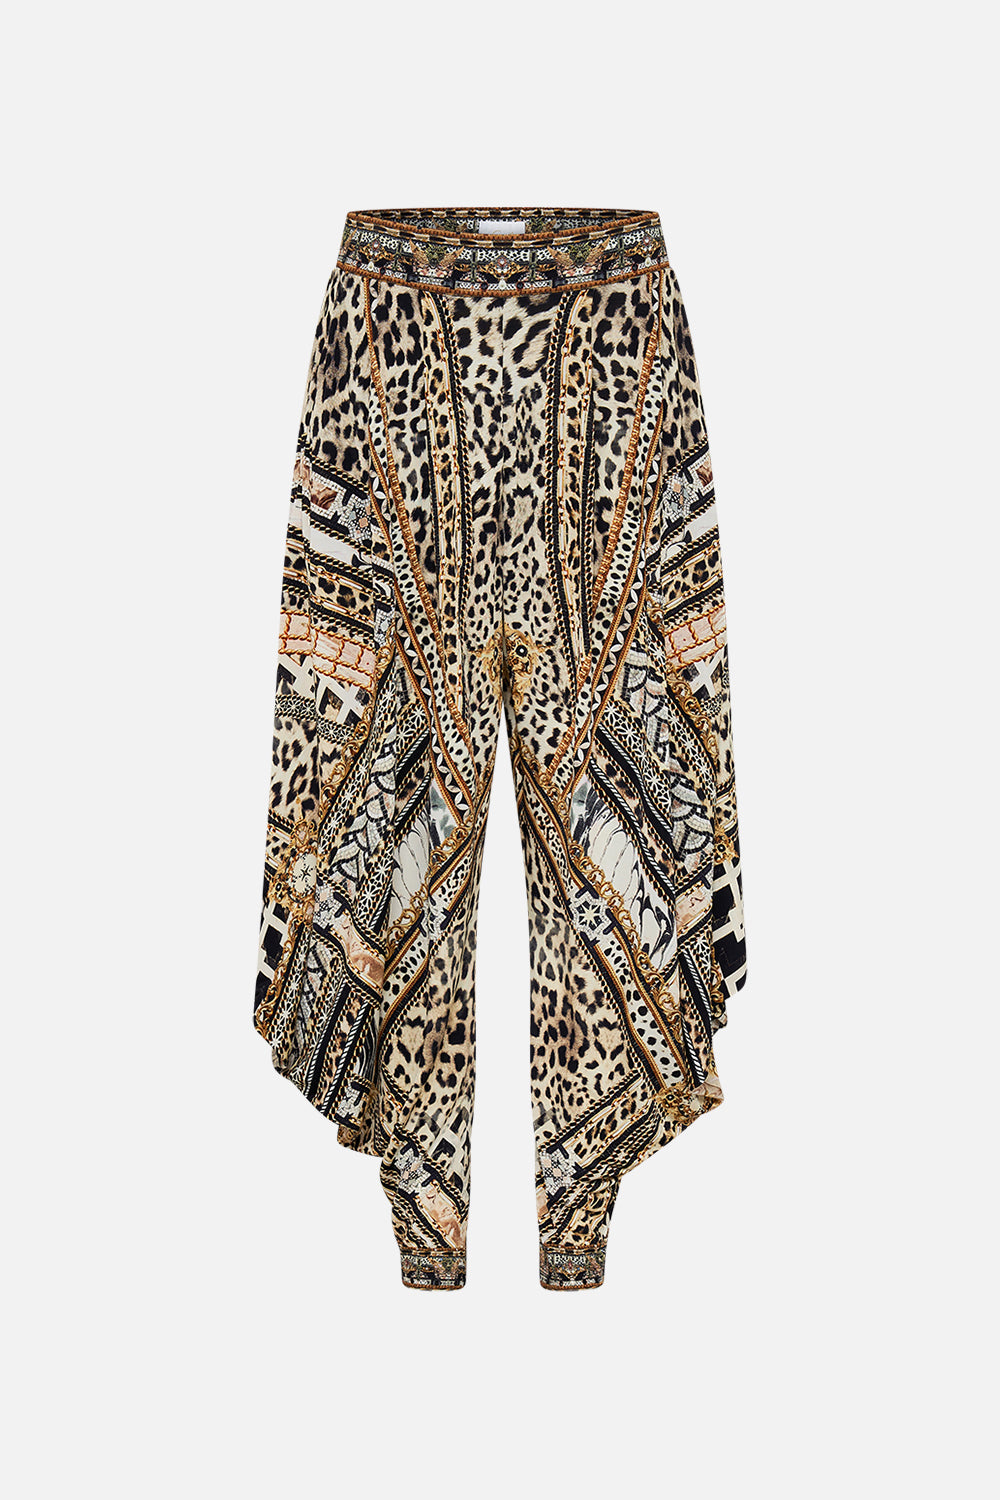 Product view of CAMILLA luxury jersey pant in Mosaic Muse 